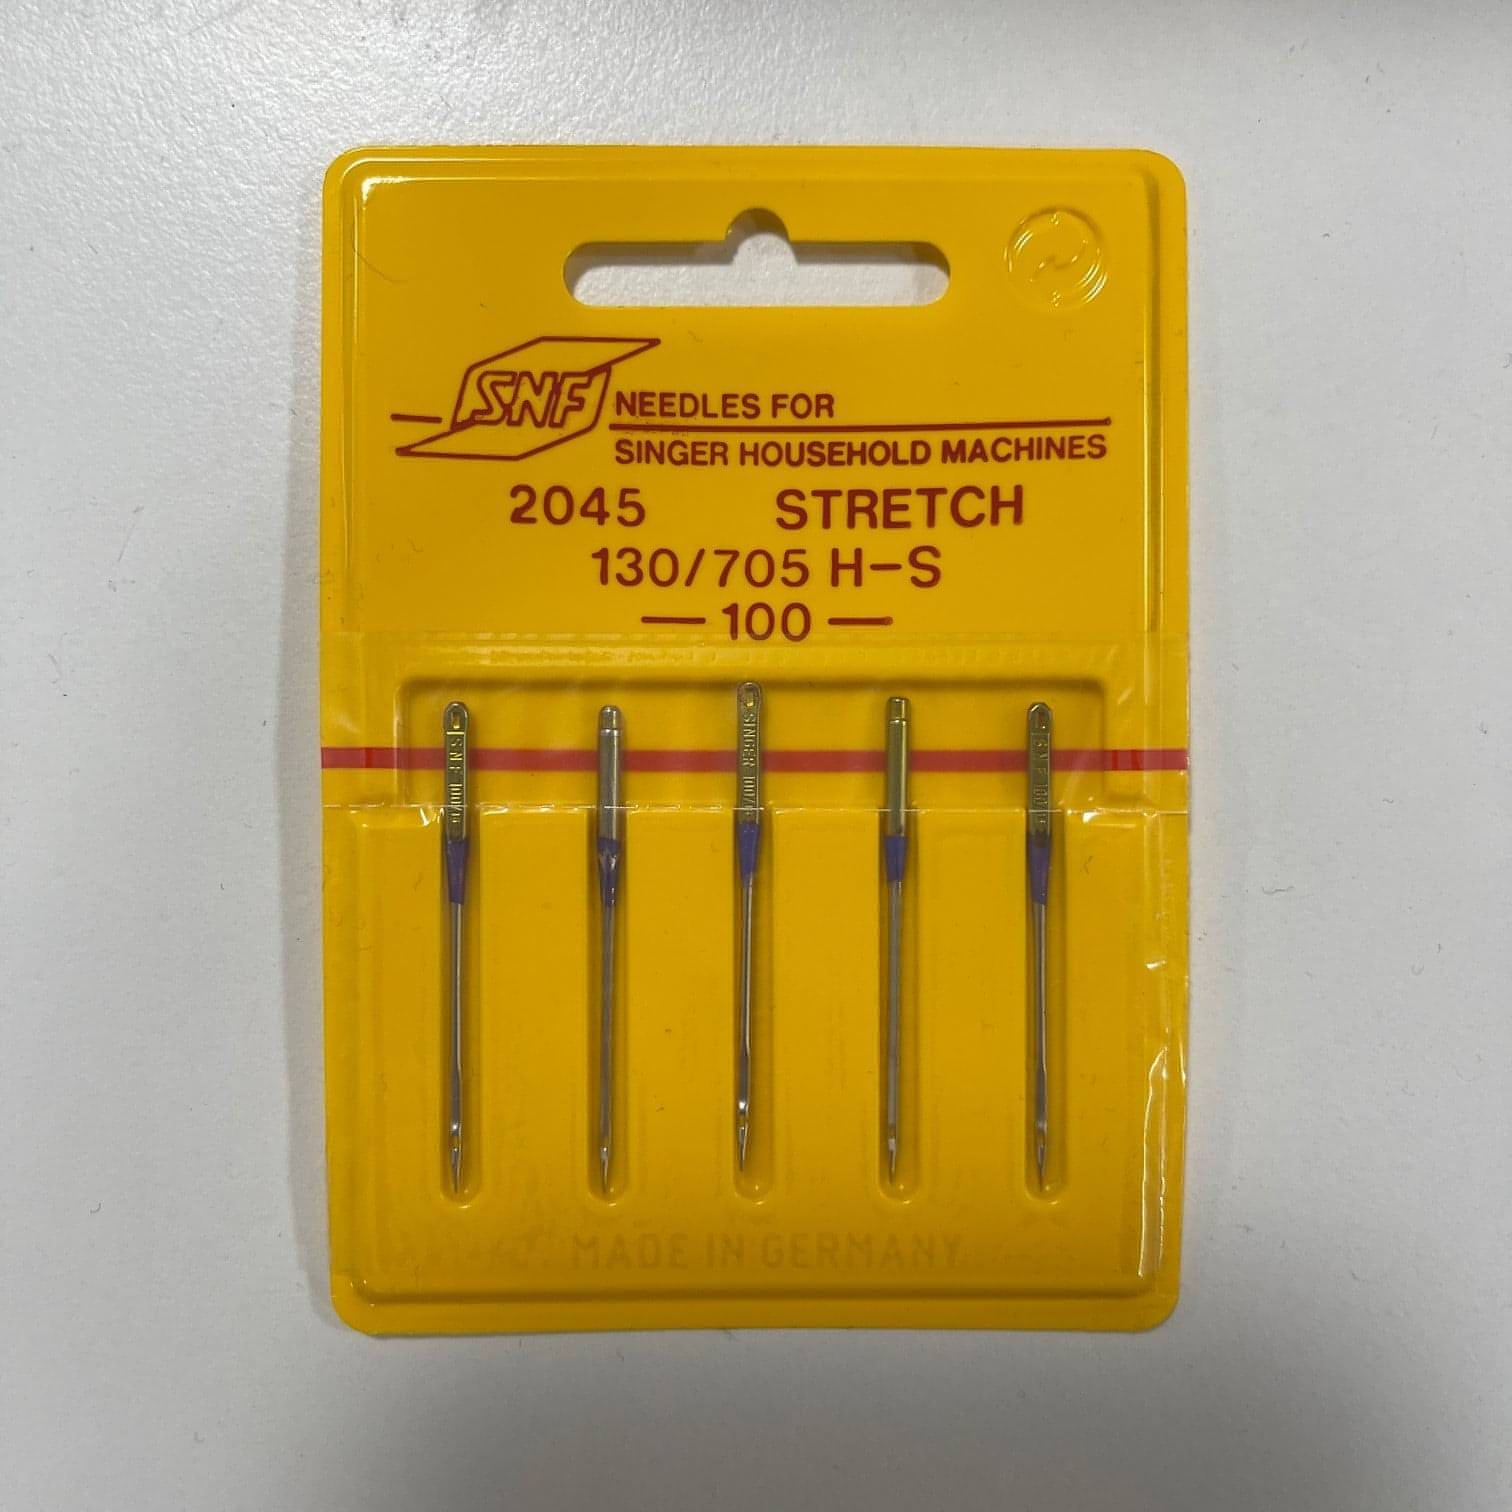 5 x Stretch 2045 100 weight needles for Singer machines (made in Germany)